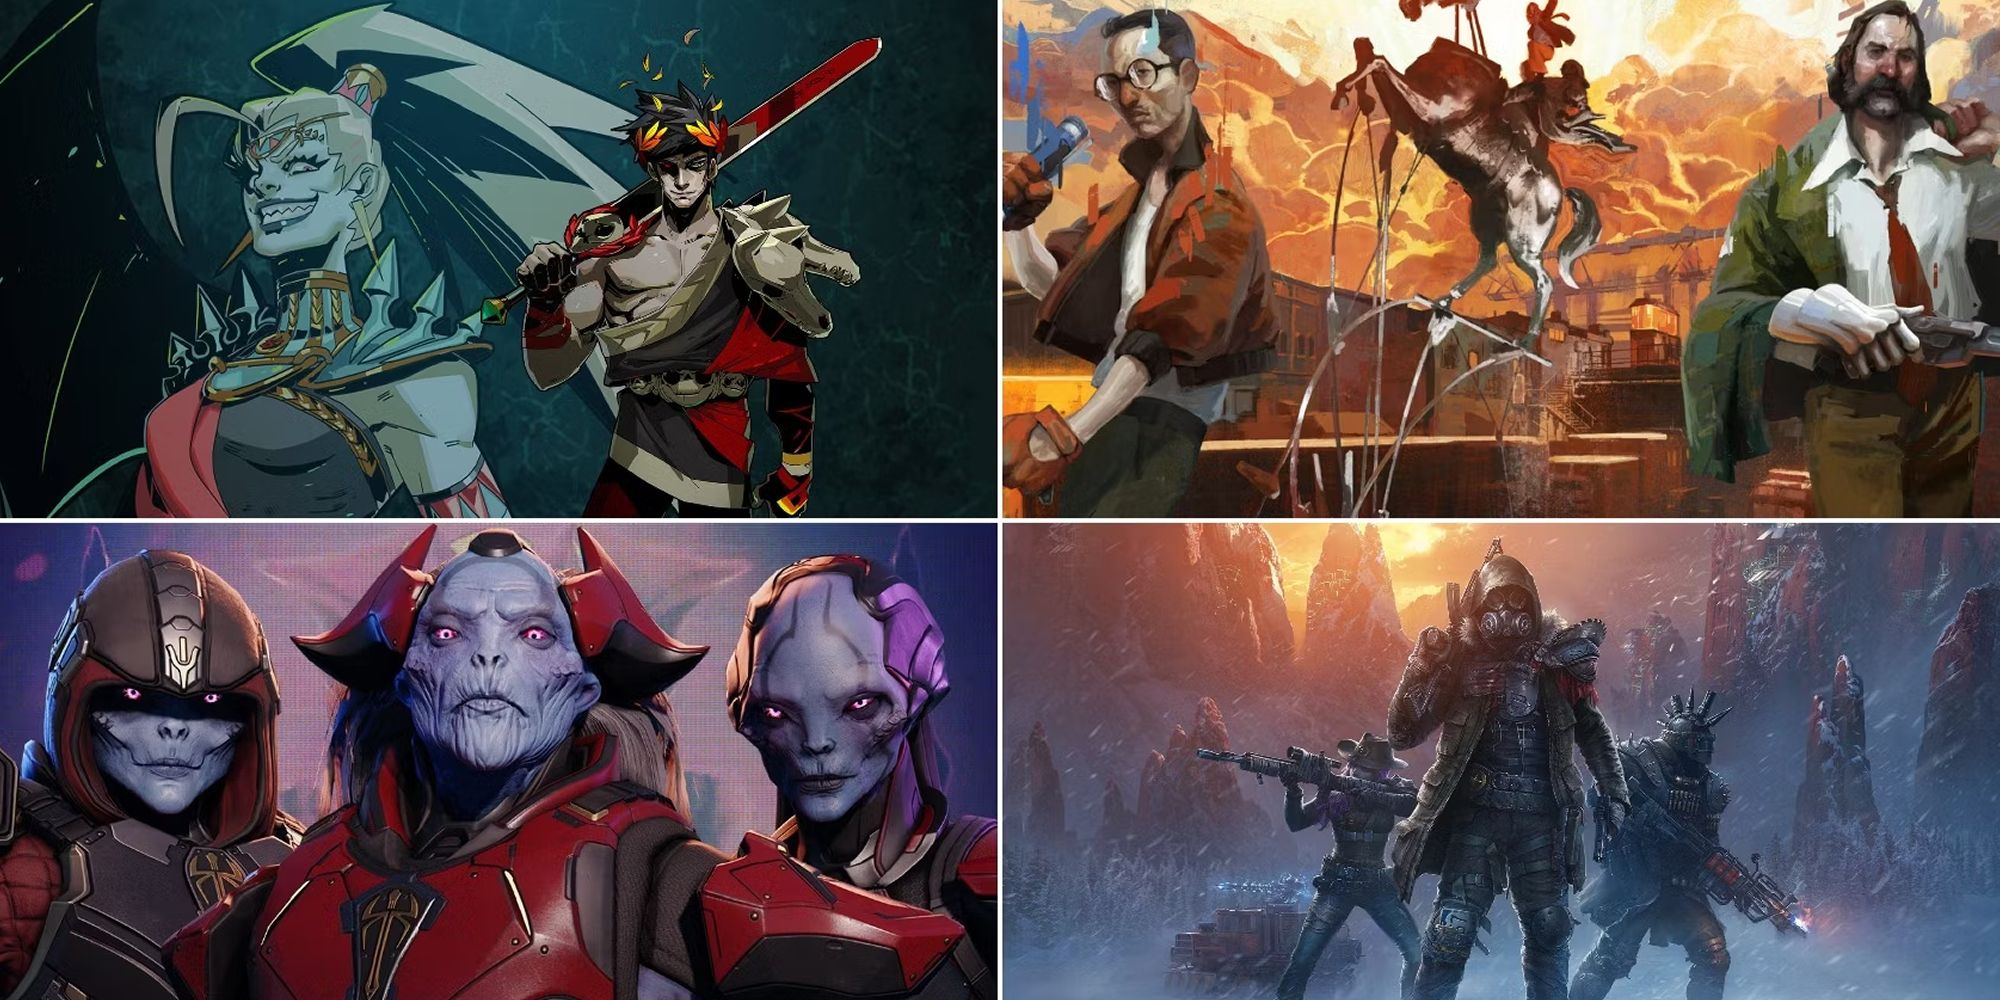 A Split Image of Scenes From Hades, XCOM 2, Disco Elysium, and Wasteland 3